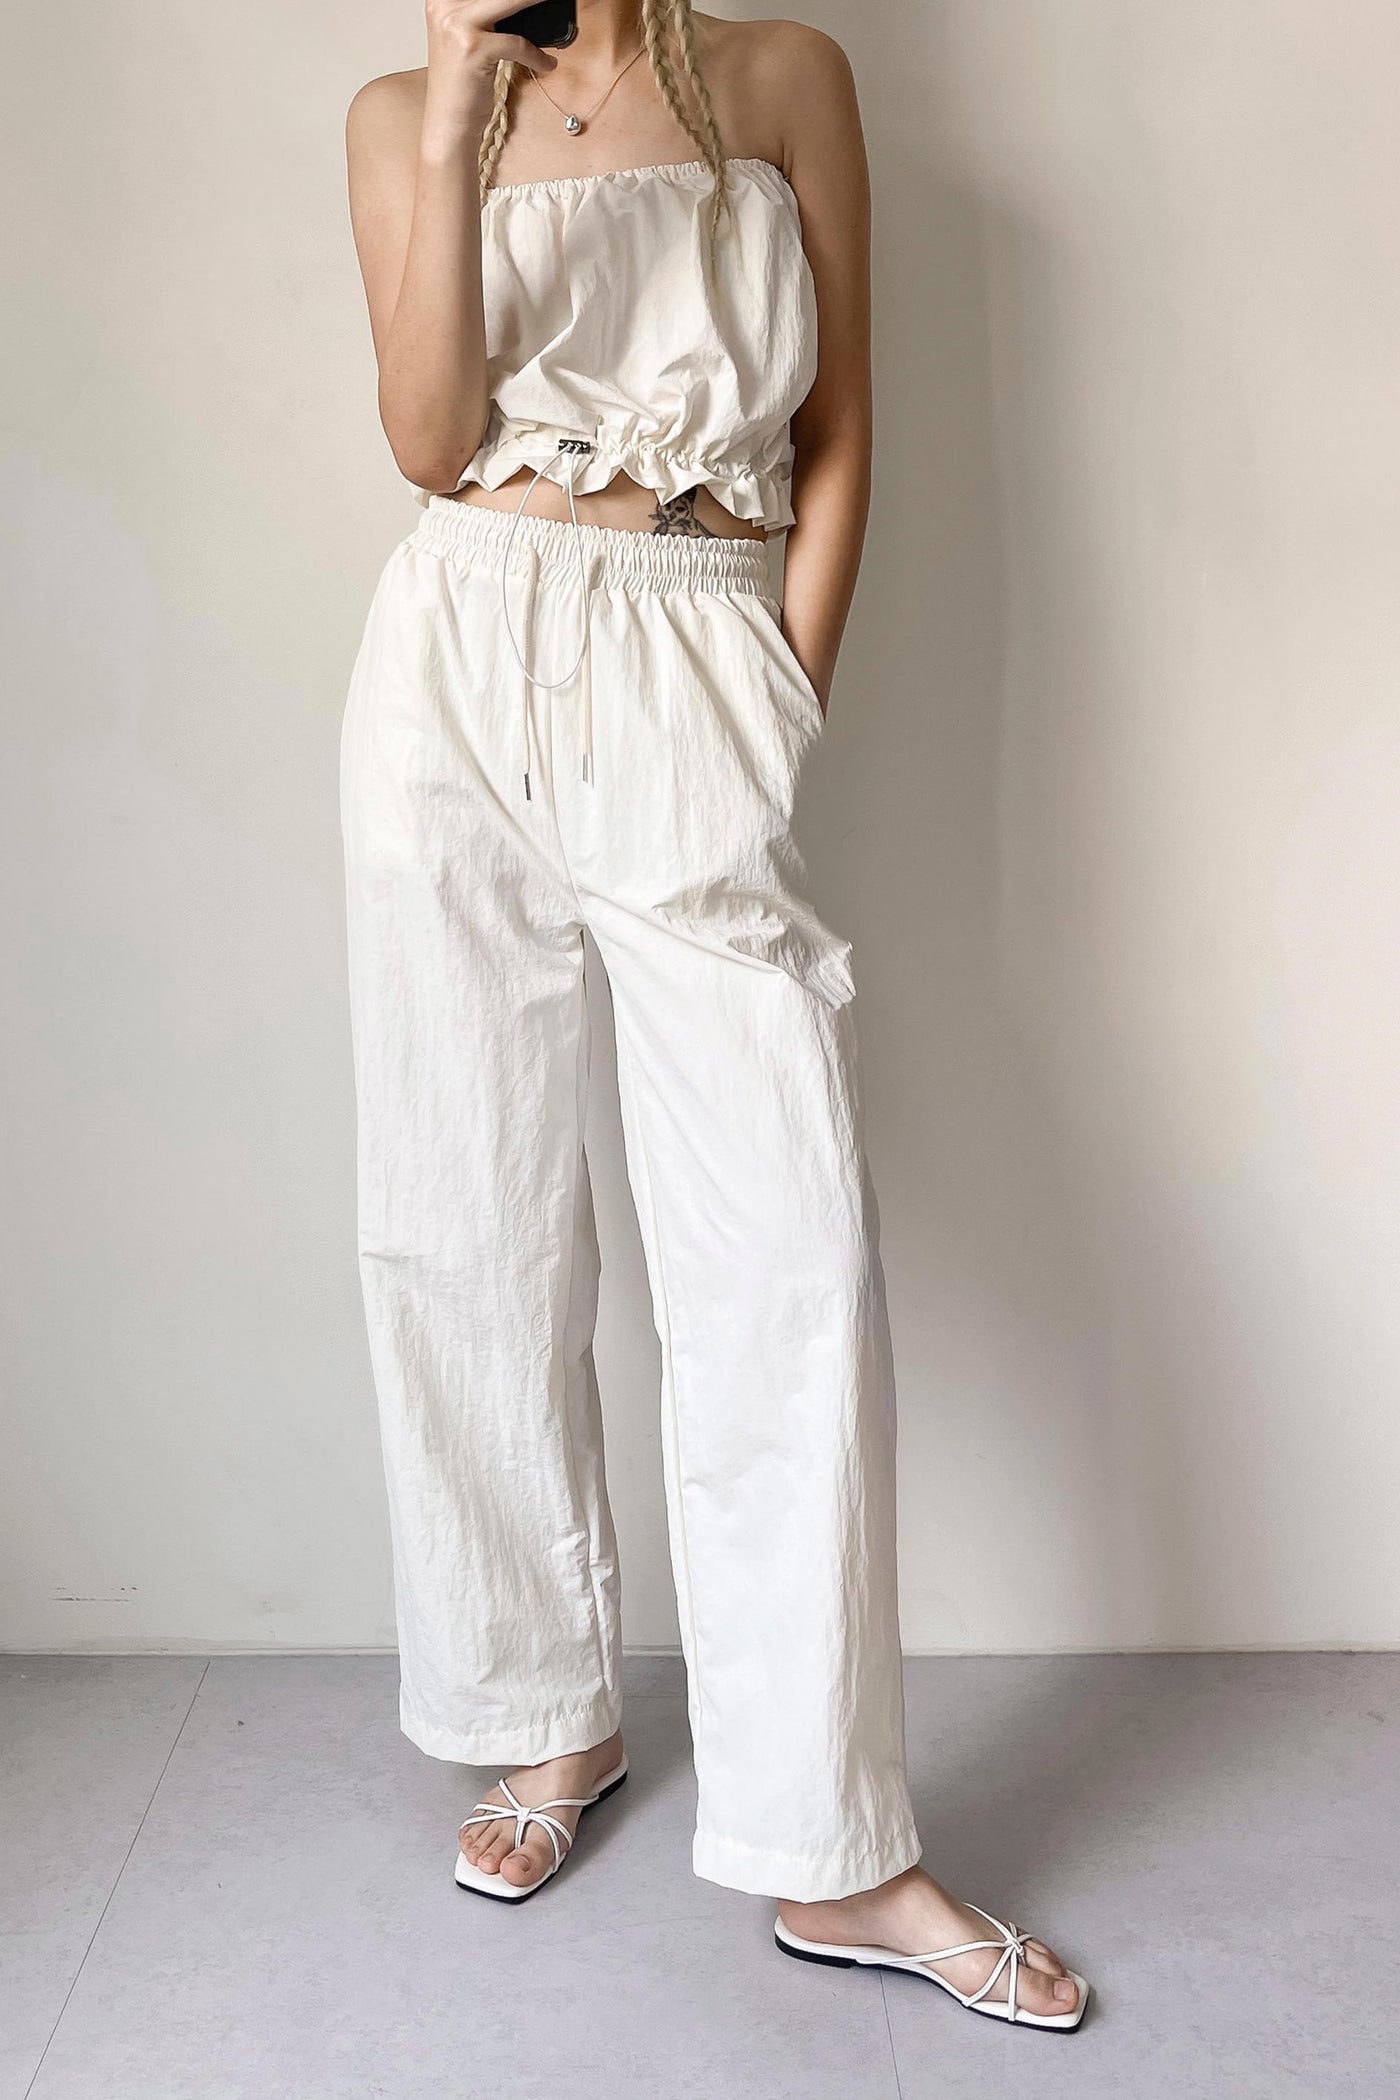 storets.com Evelyn Tube Top and Pants Set